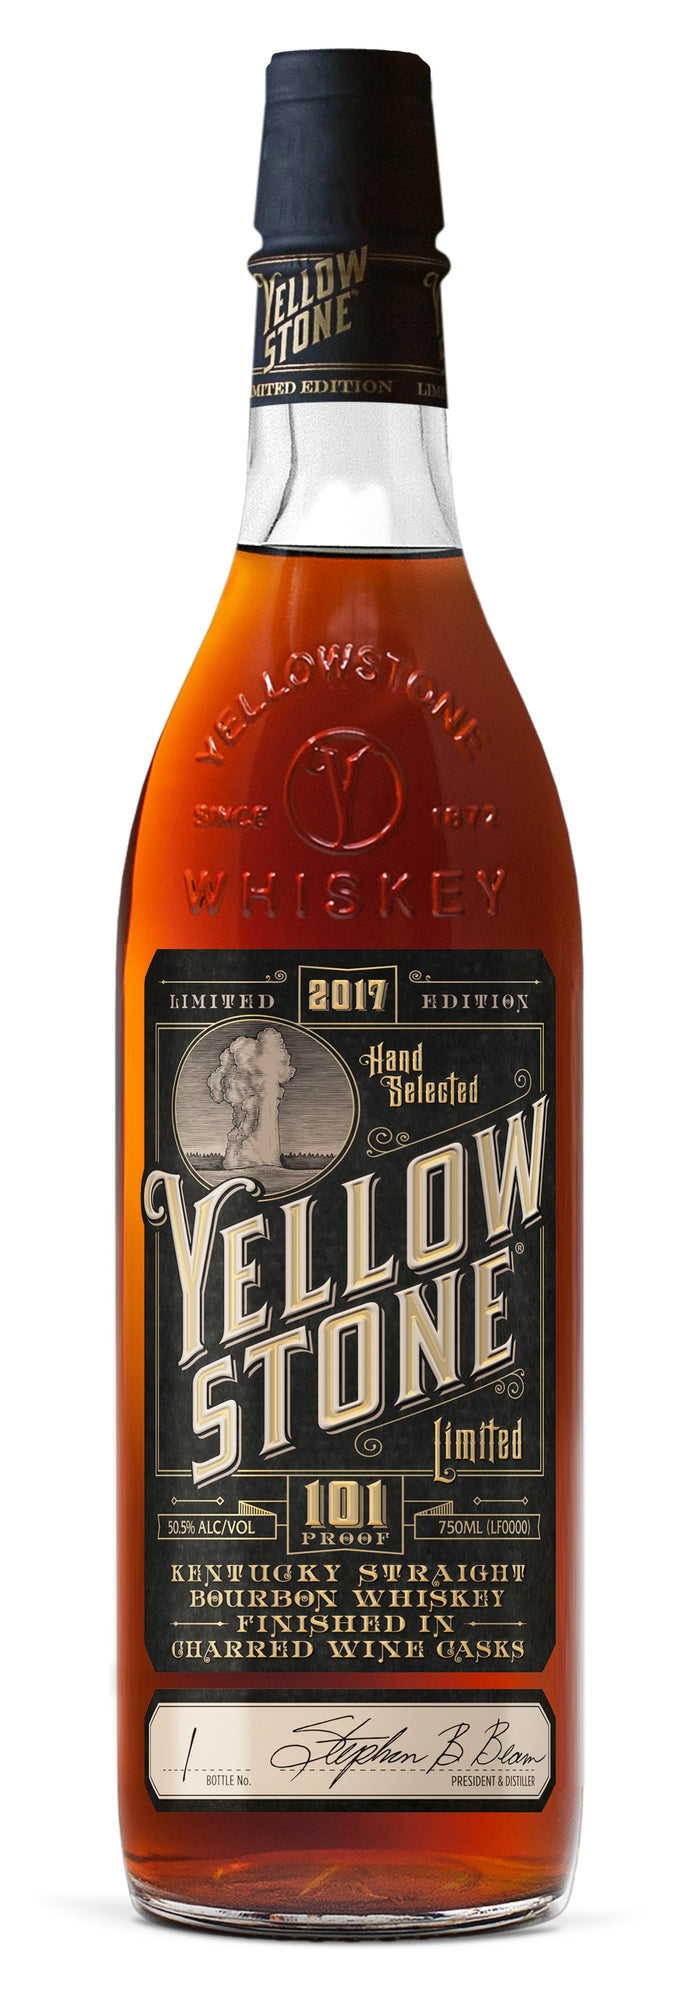 Yellowstone 2017 Limited Edition Bourbon Whiskey